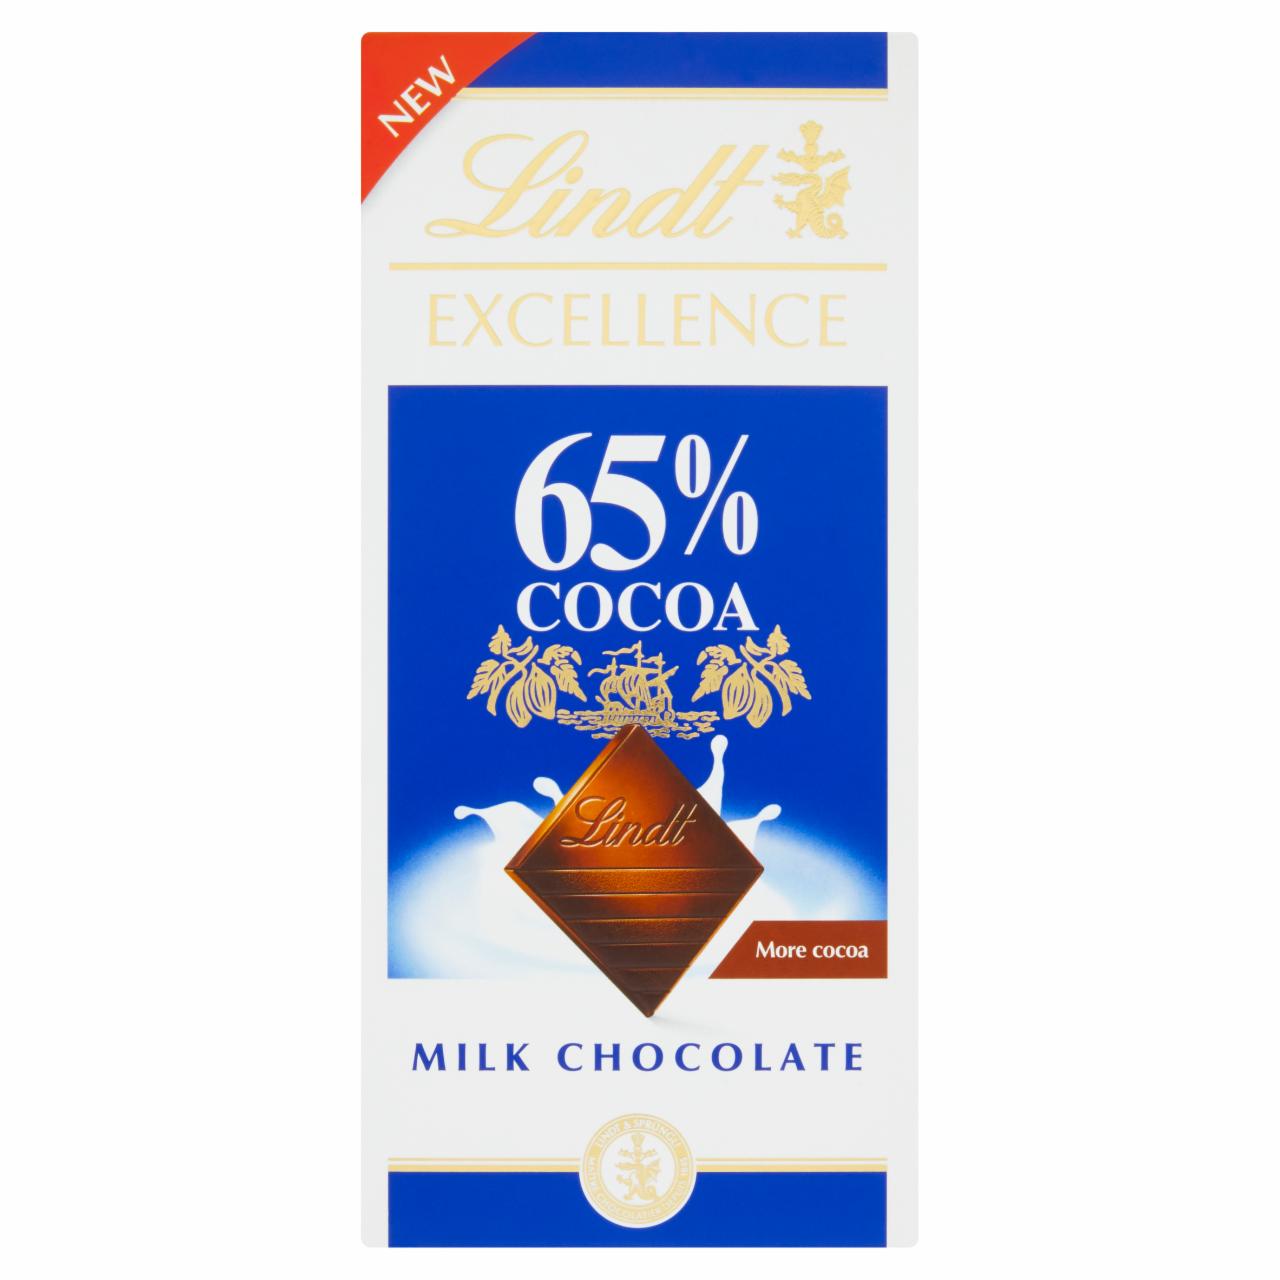 Fotografie - Lindt excellence 65% cocoa milk chocolate